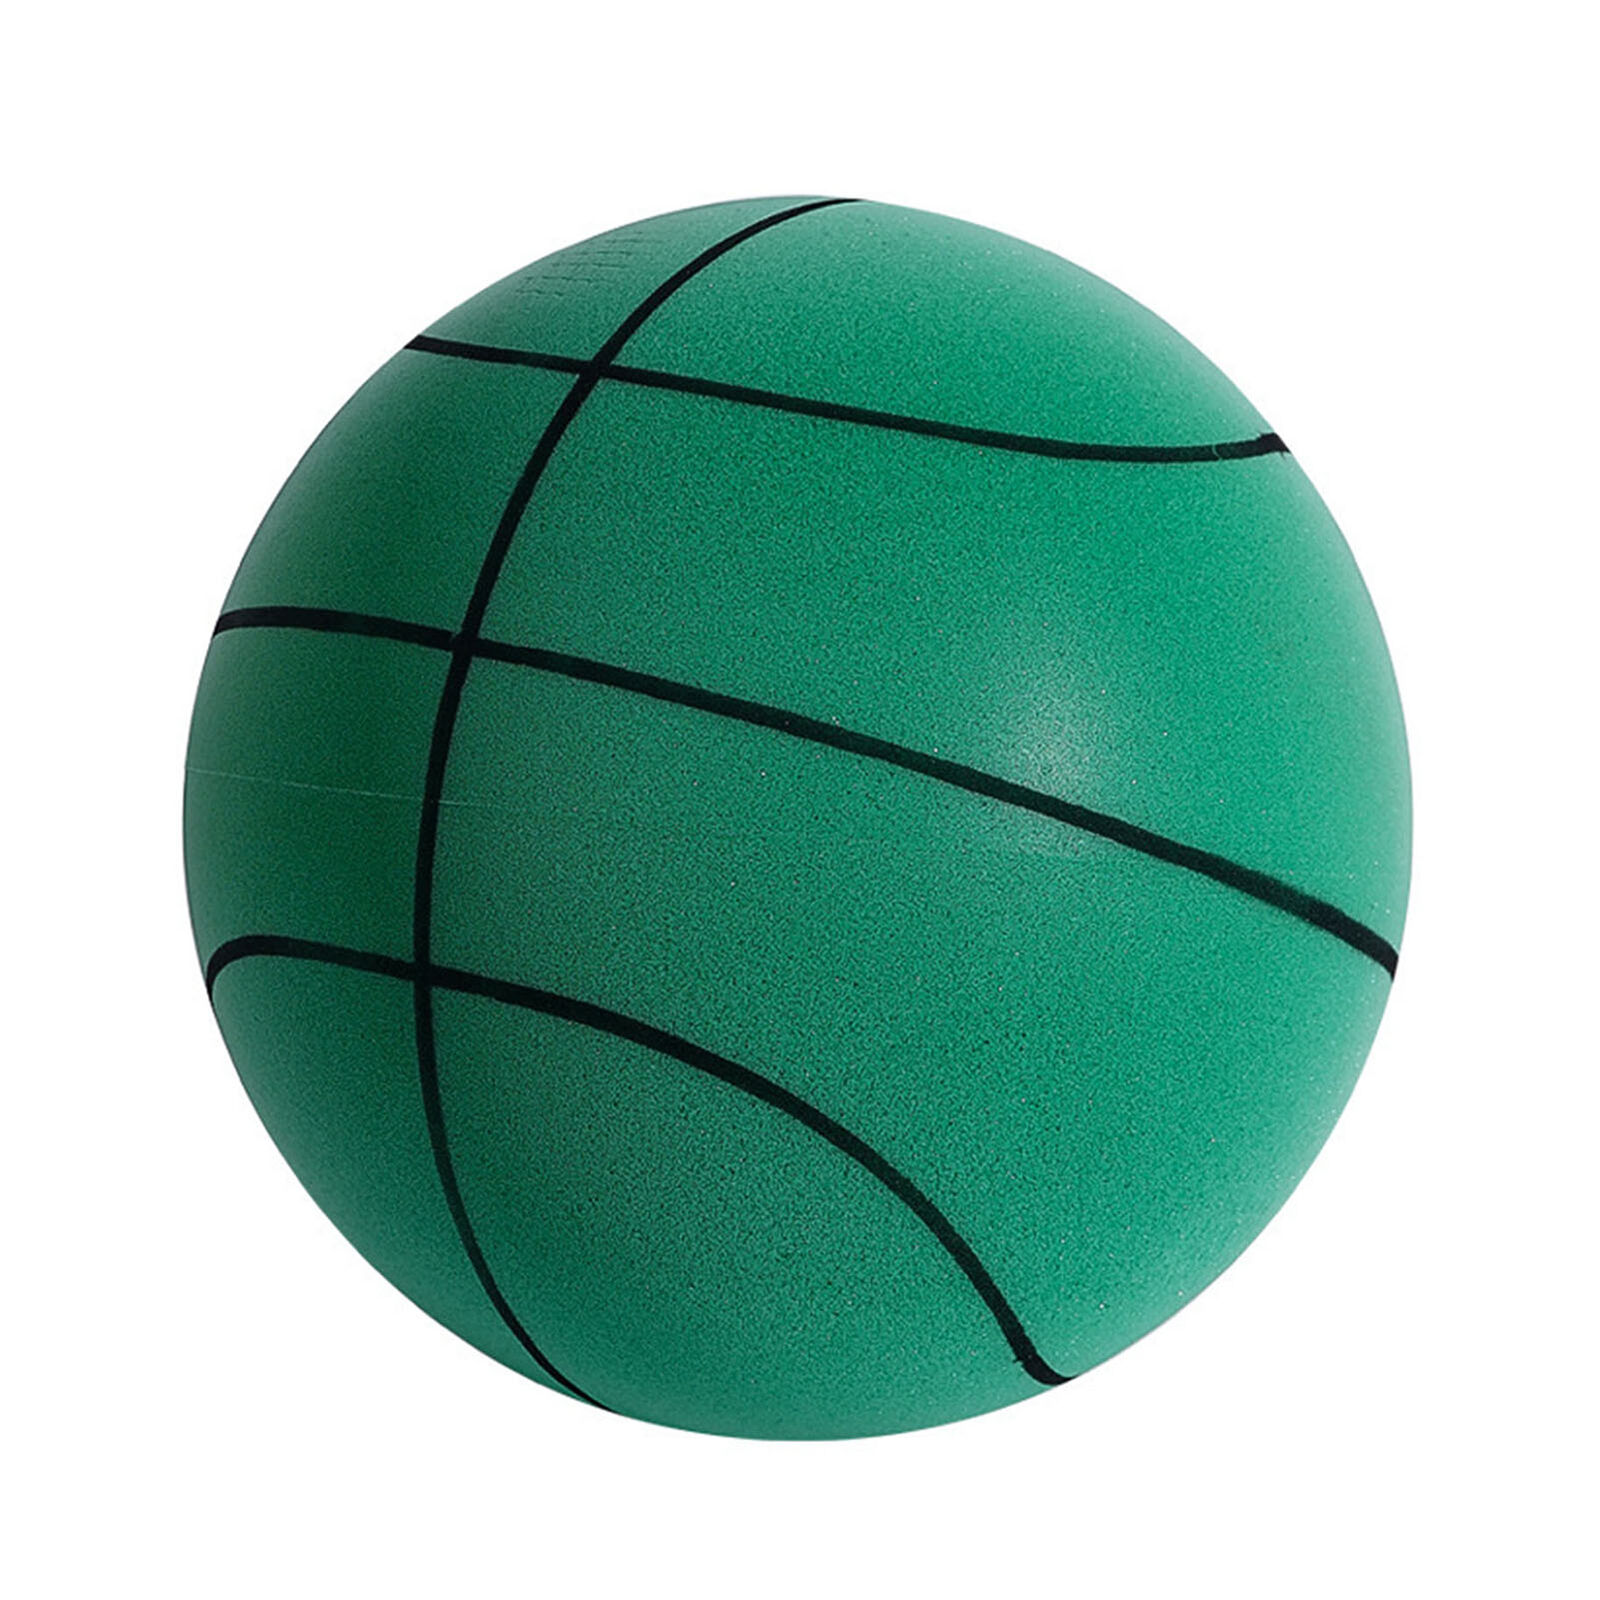 Indoor Silent Basketball High Rebound Low Noise Kids Ideal for Ball Practice